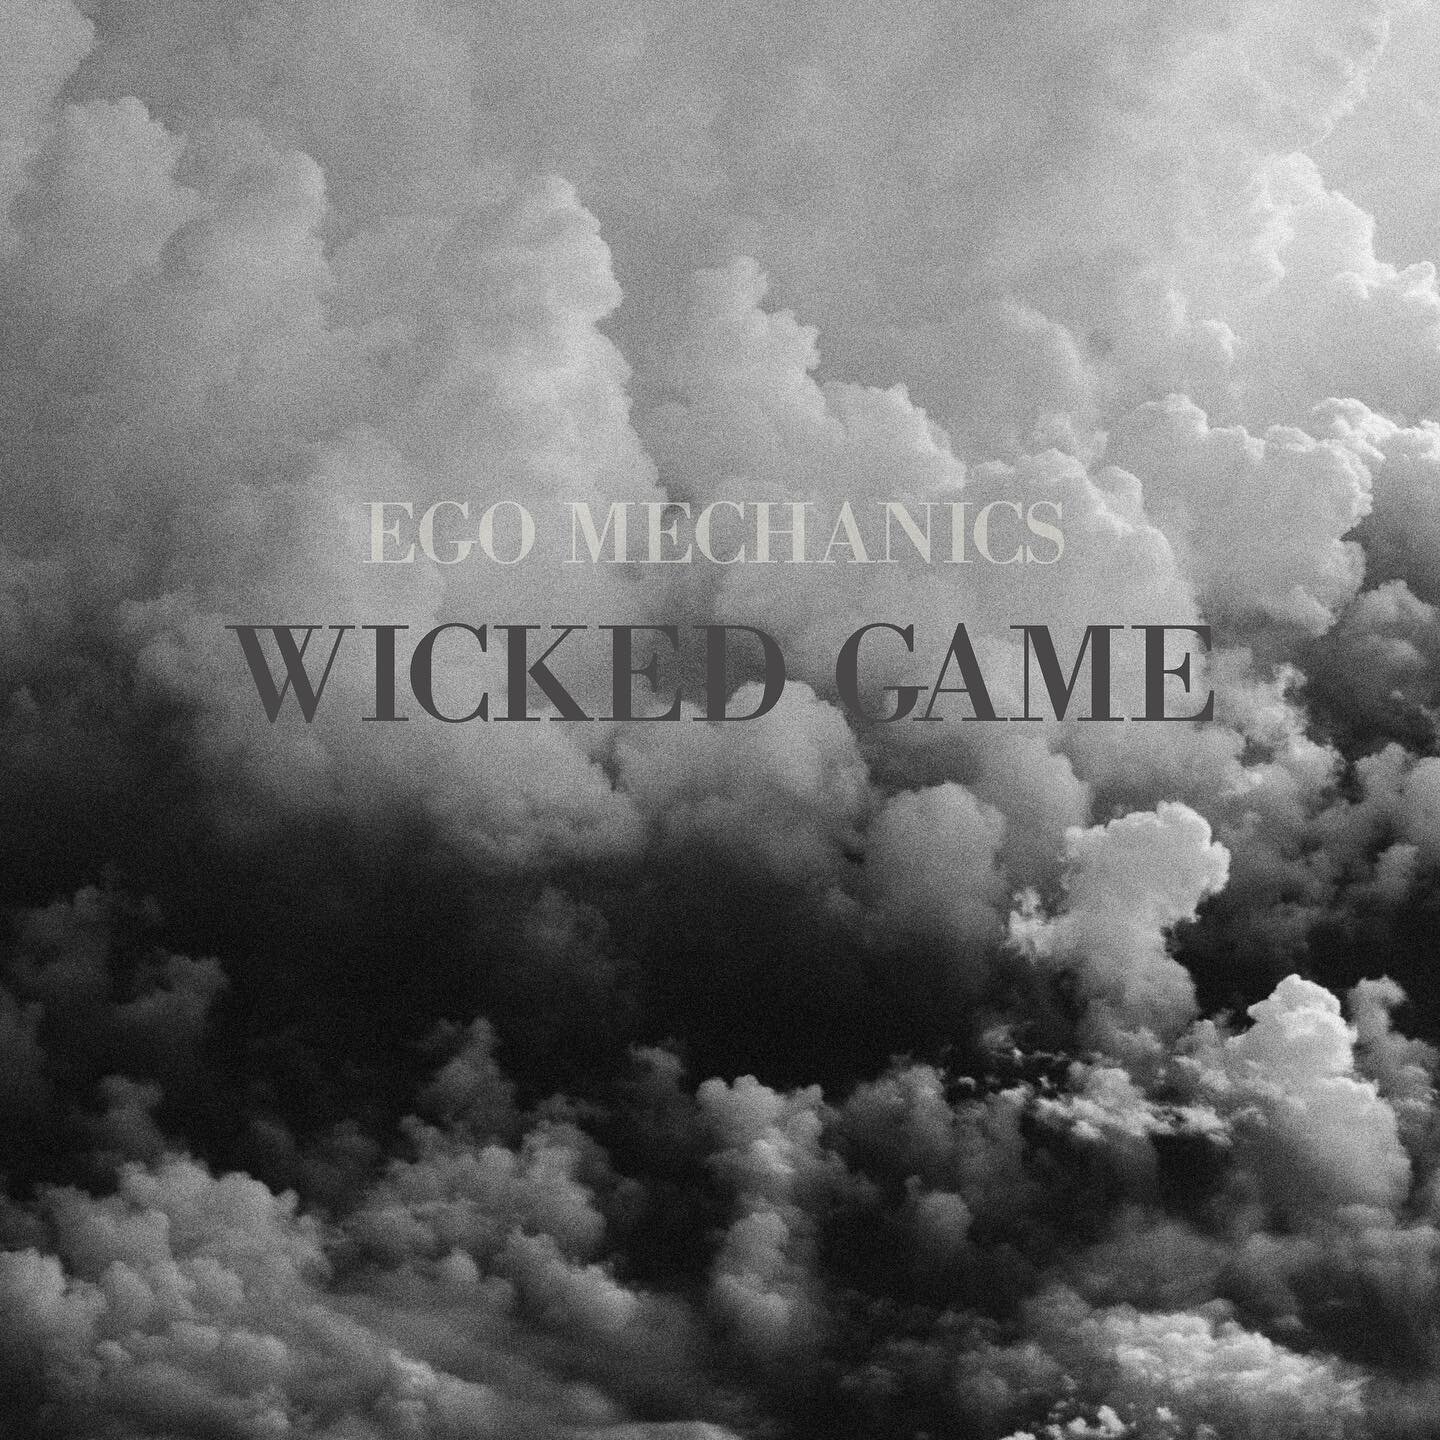 If you&rsquo;ve ever come to an Ego Mechanics show, you know @chrisisaak&rsquo;s Wicked Game is a staple in our set, often as an interlude during our song &ldquo;Keep It In Mind.&rdquo; For a proper recorded cover, I wanted to do this Billie Eilish m